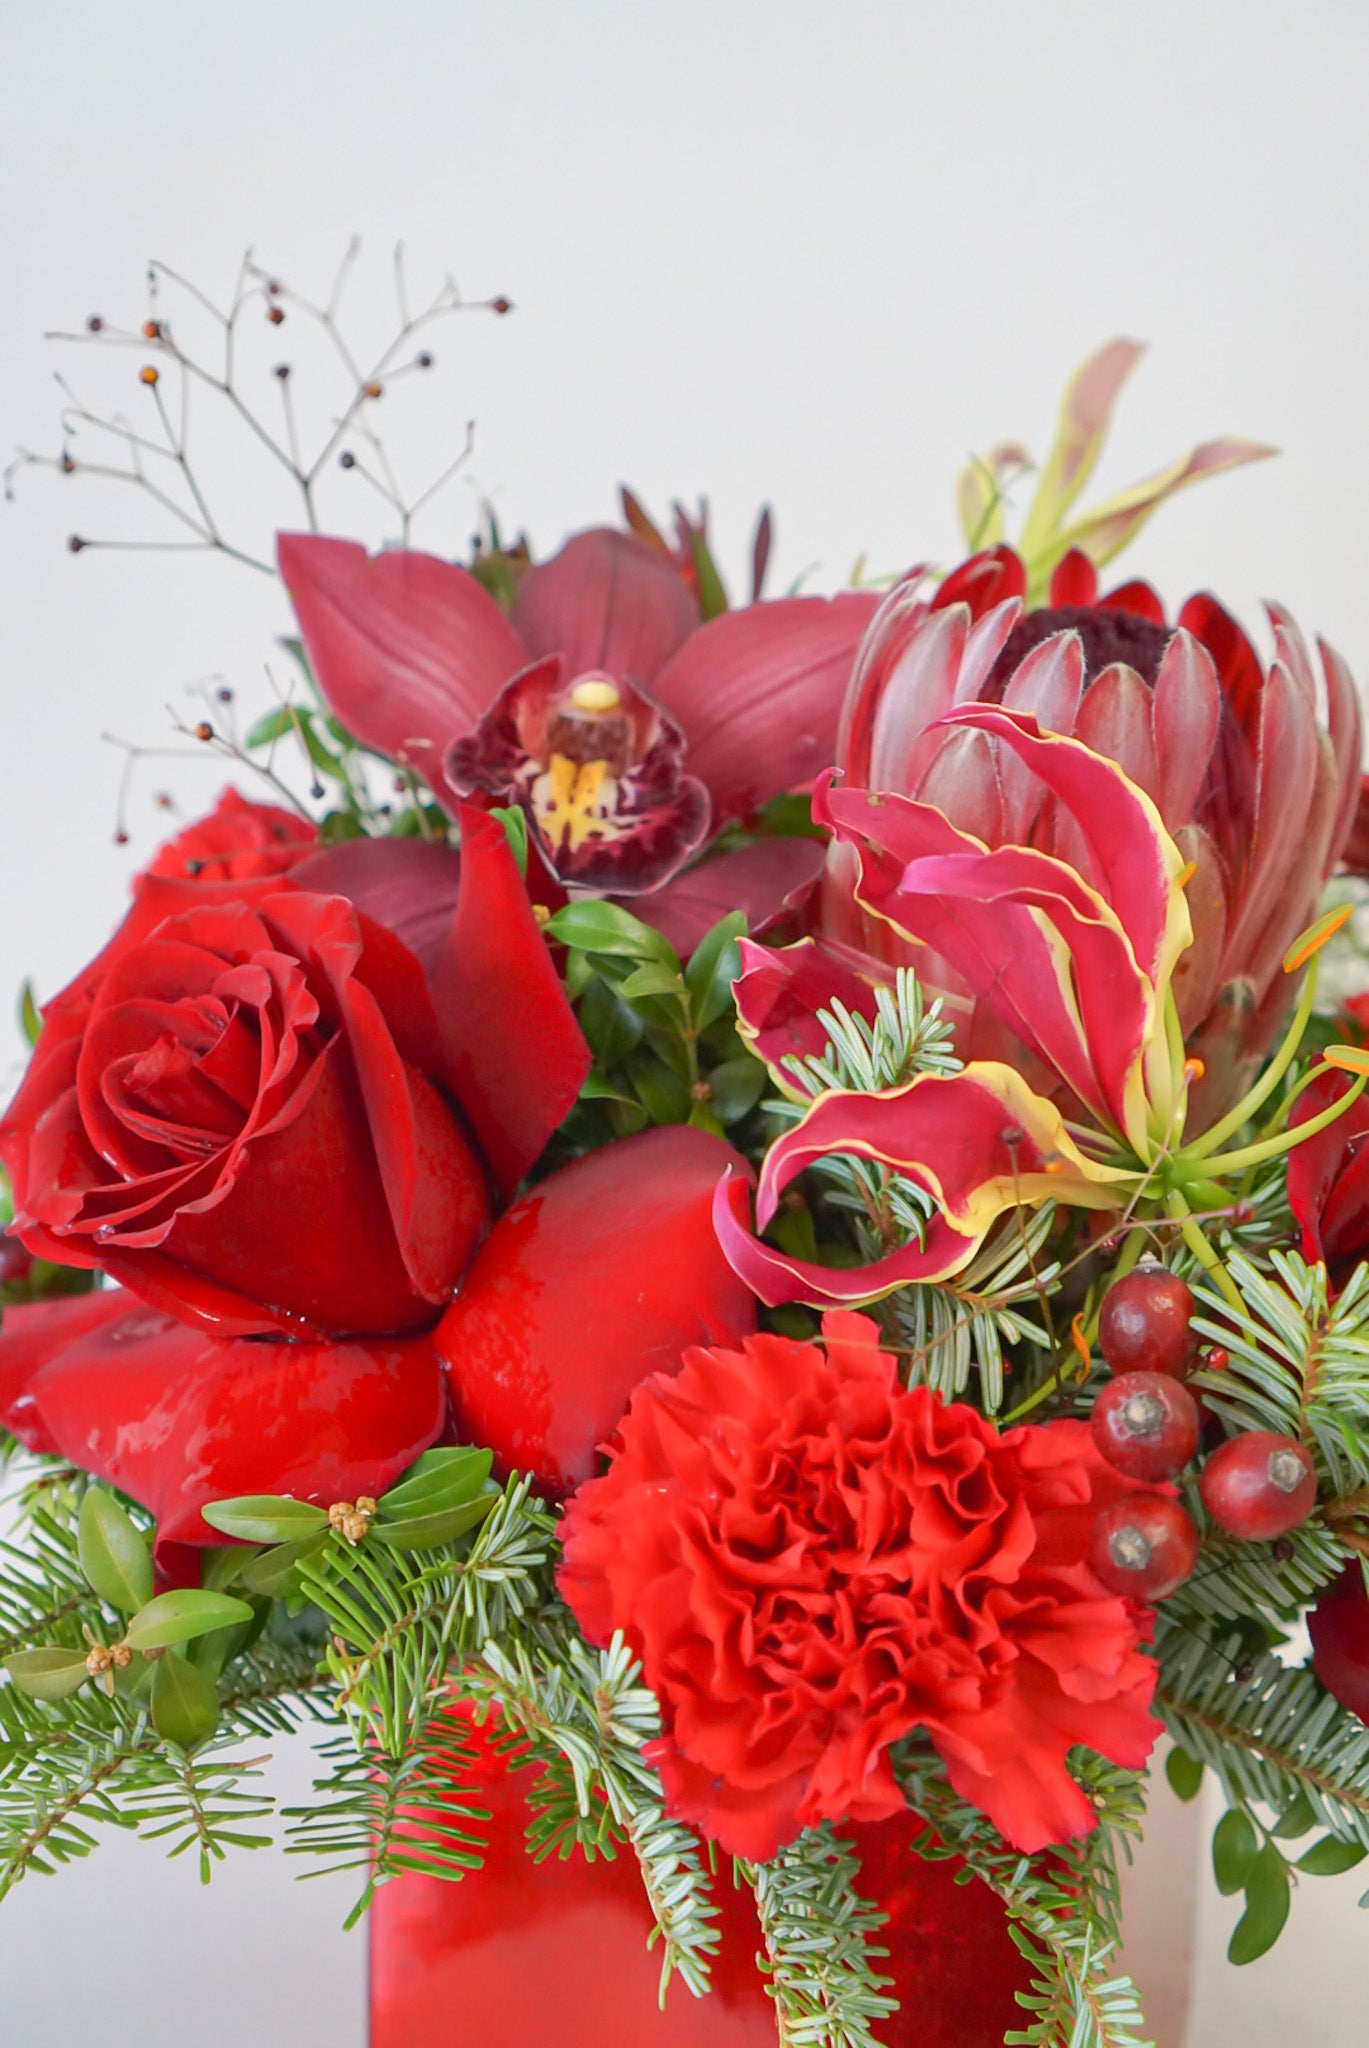 Bring your holiday table to life with this beautiful all red blooms flower arrangement. A charming display of protea, freedom roses, gloriosa, with a fragrant assortment of winter evergreen. Flower Nook, Toronto Florist